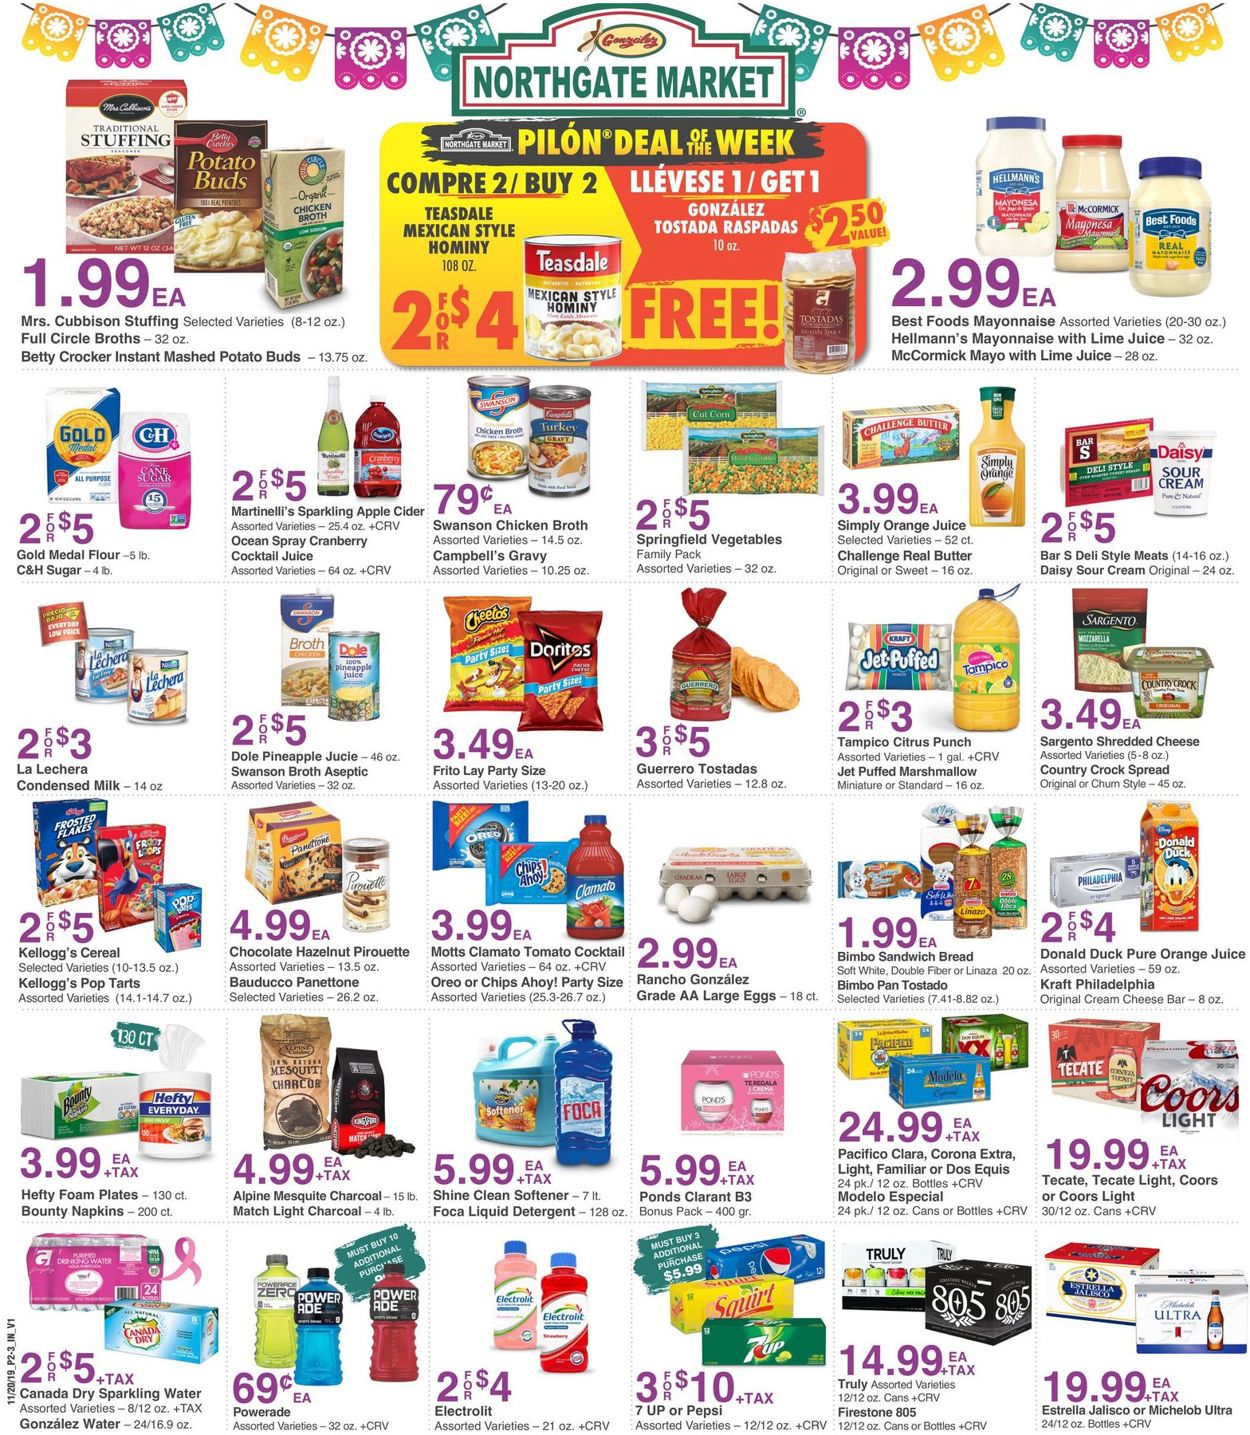 Catalogue Northgate Market - Thanksgiving Ad 2019 from 11/20/2019